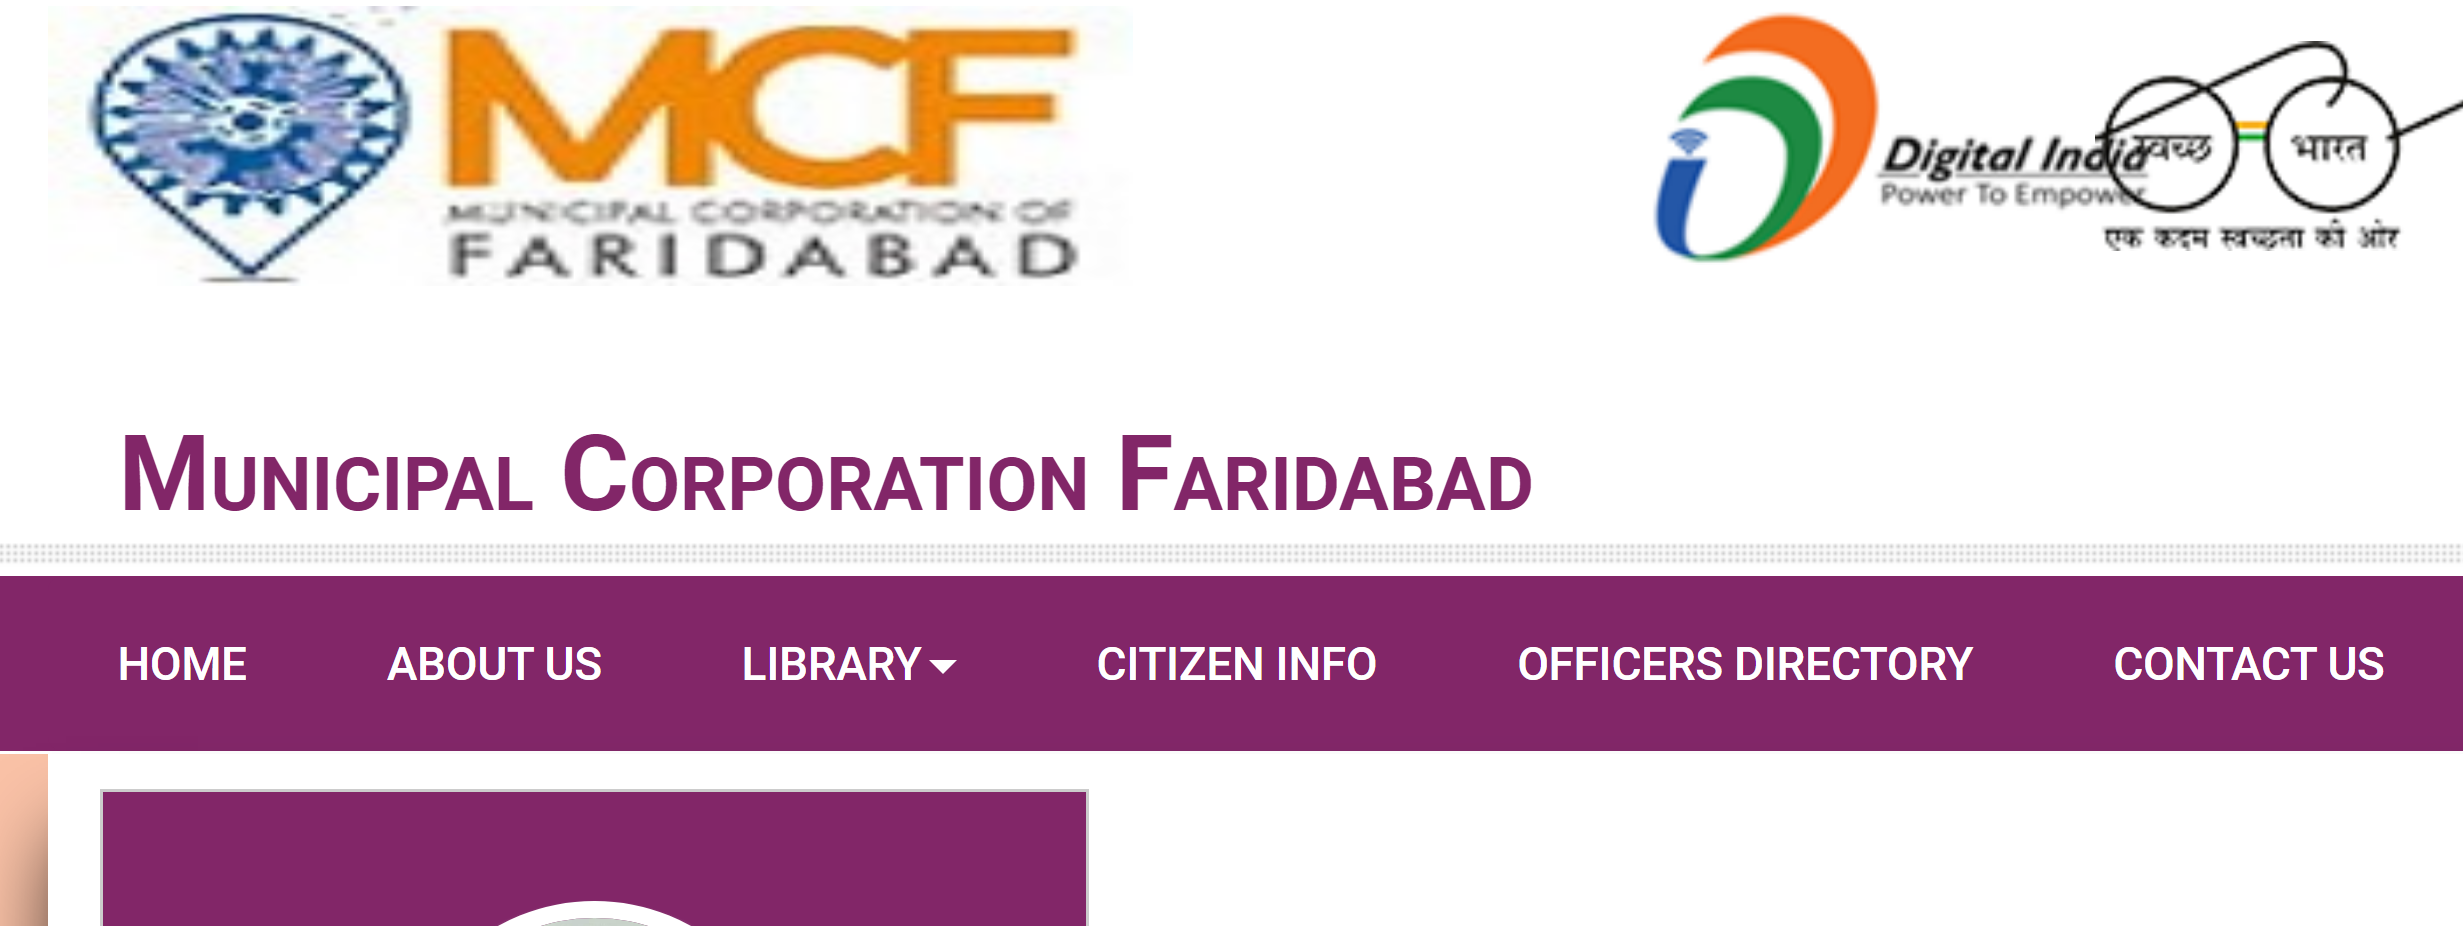 Contact Details for complaining to Municipal Corporation Faridabad